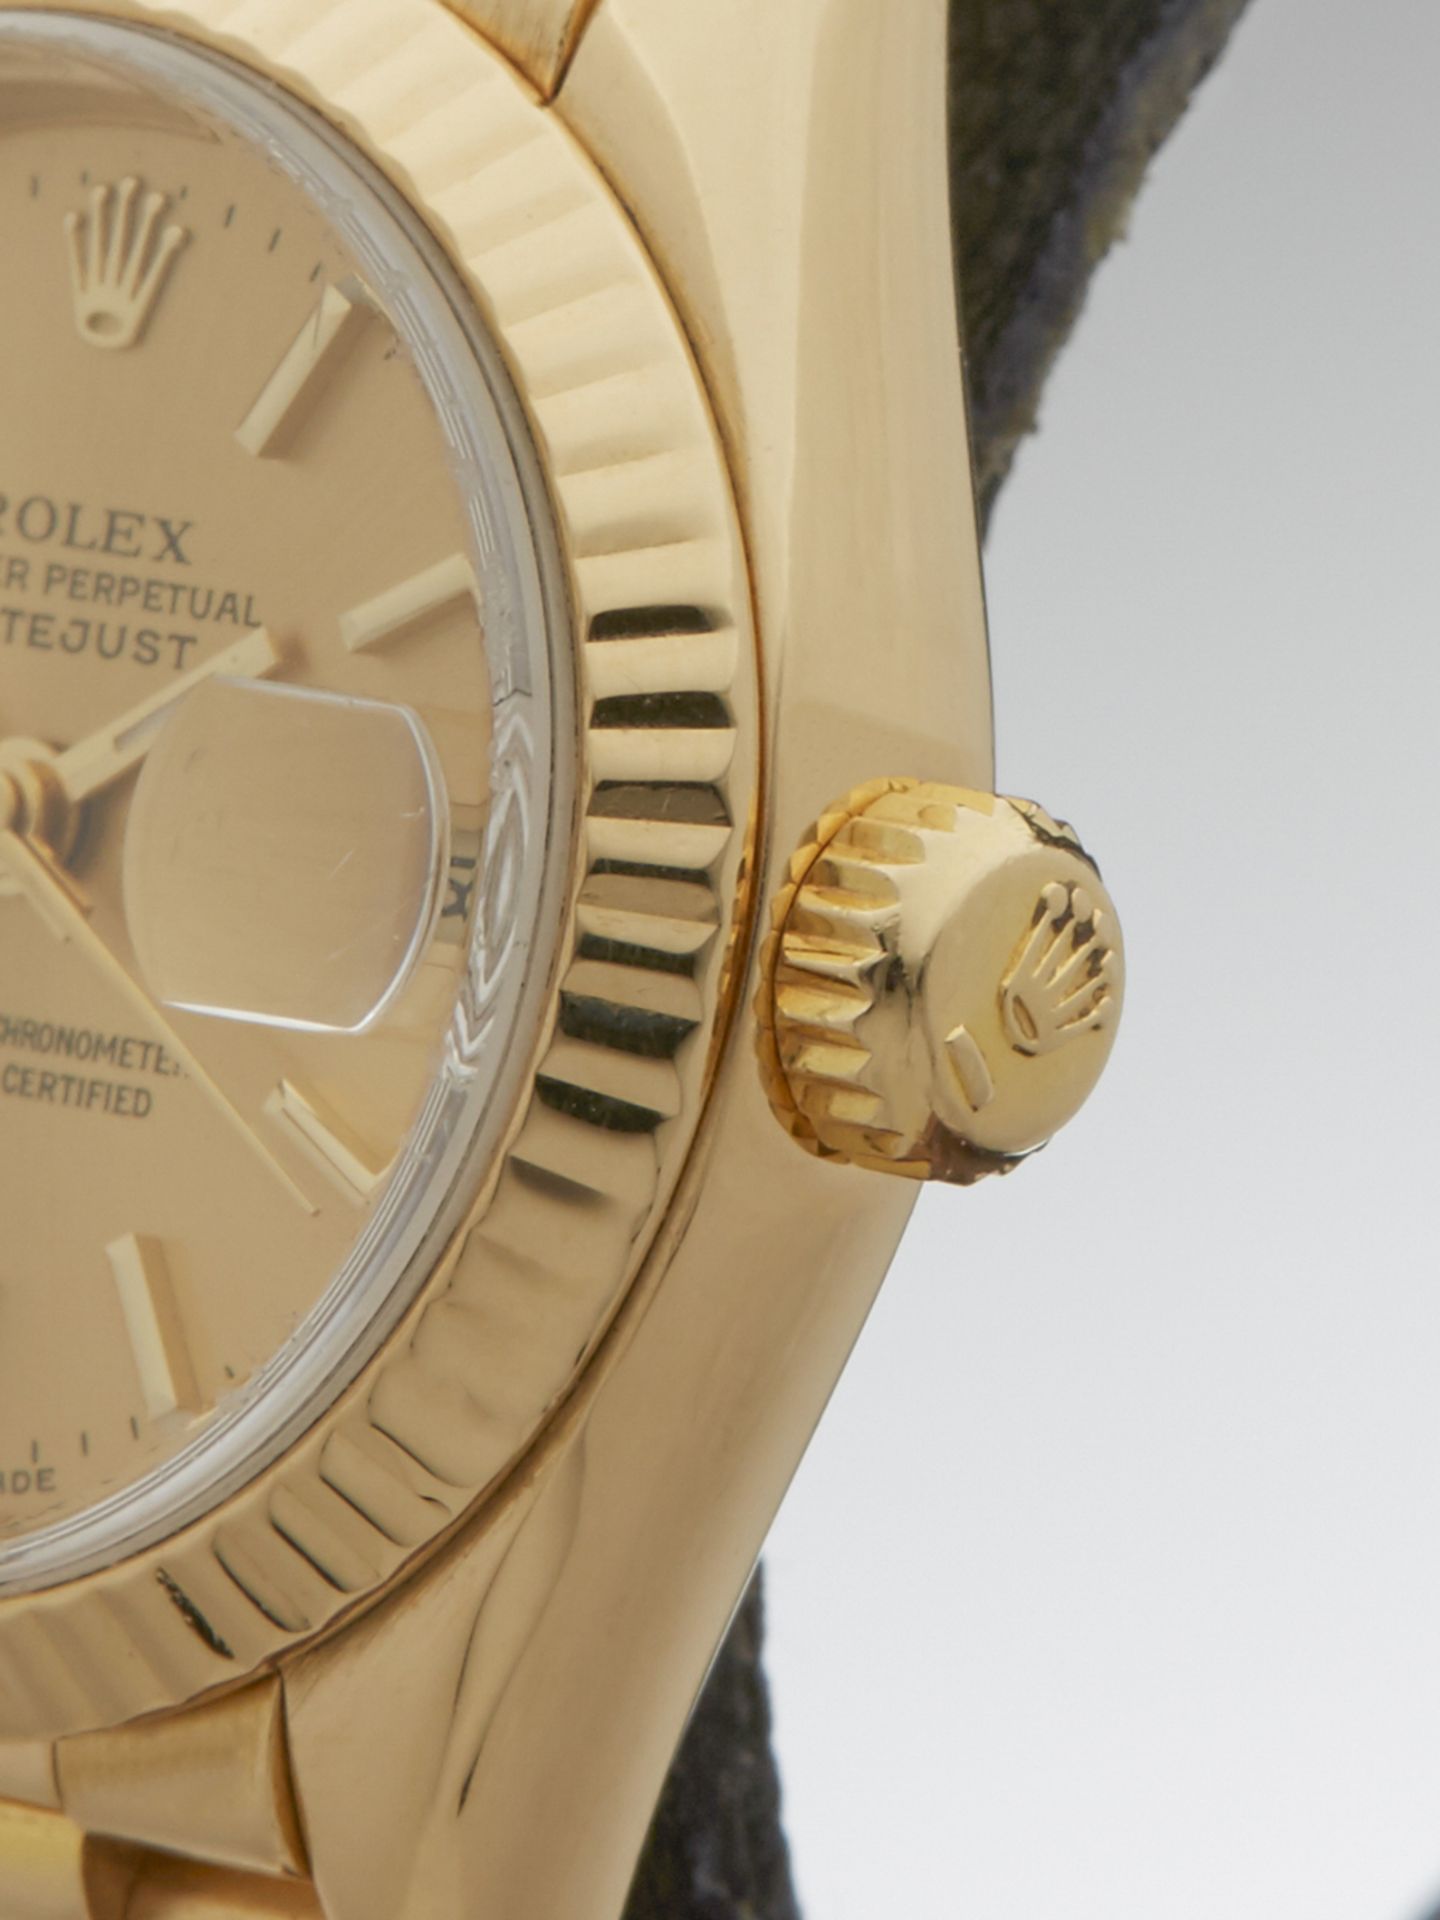 1989 Rolex, Datejust Lady DateJust 26mm 18k Yellow Gold 69178 - Image 4 of 8